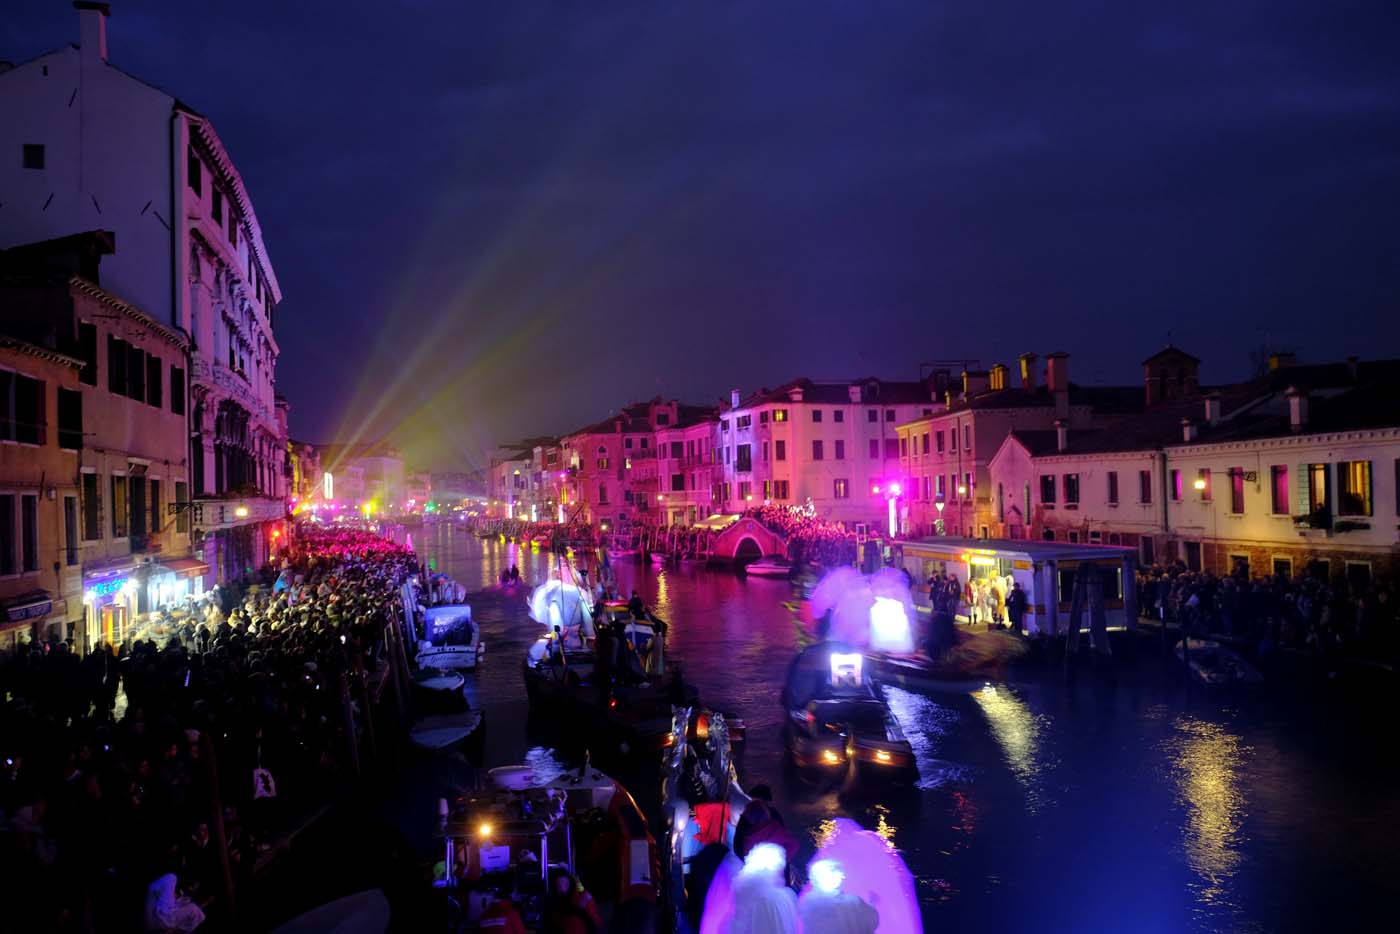 Cannaregio Channel is illuminated during the opening ceremony of the Carnival in Venice, Italy January 27, 2018. REUTERS/Manuel Silvestri